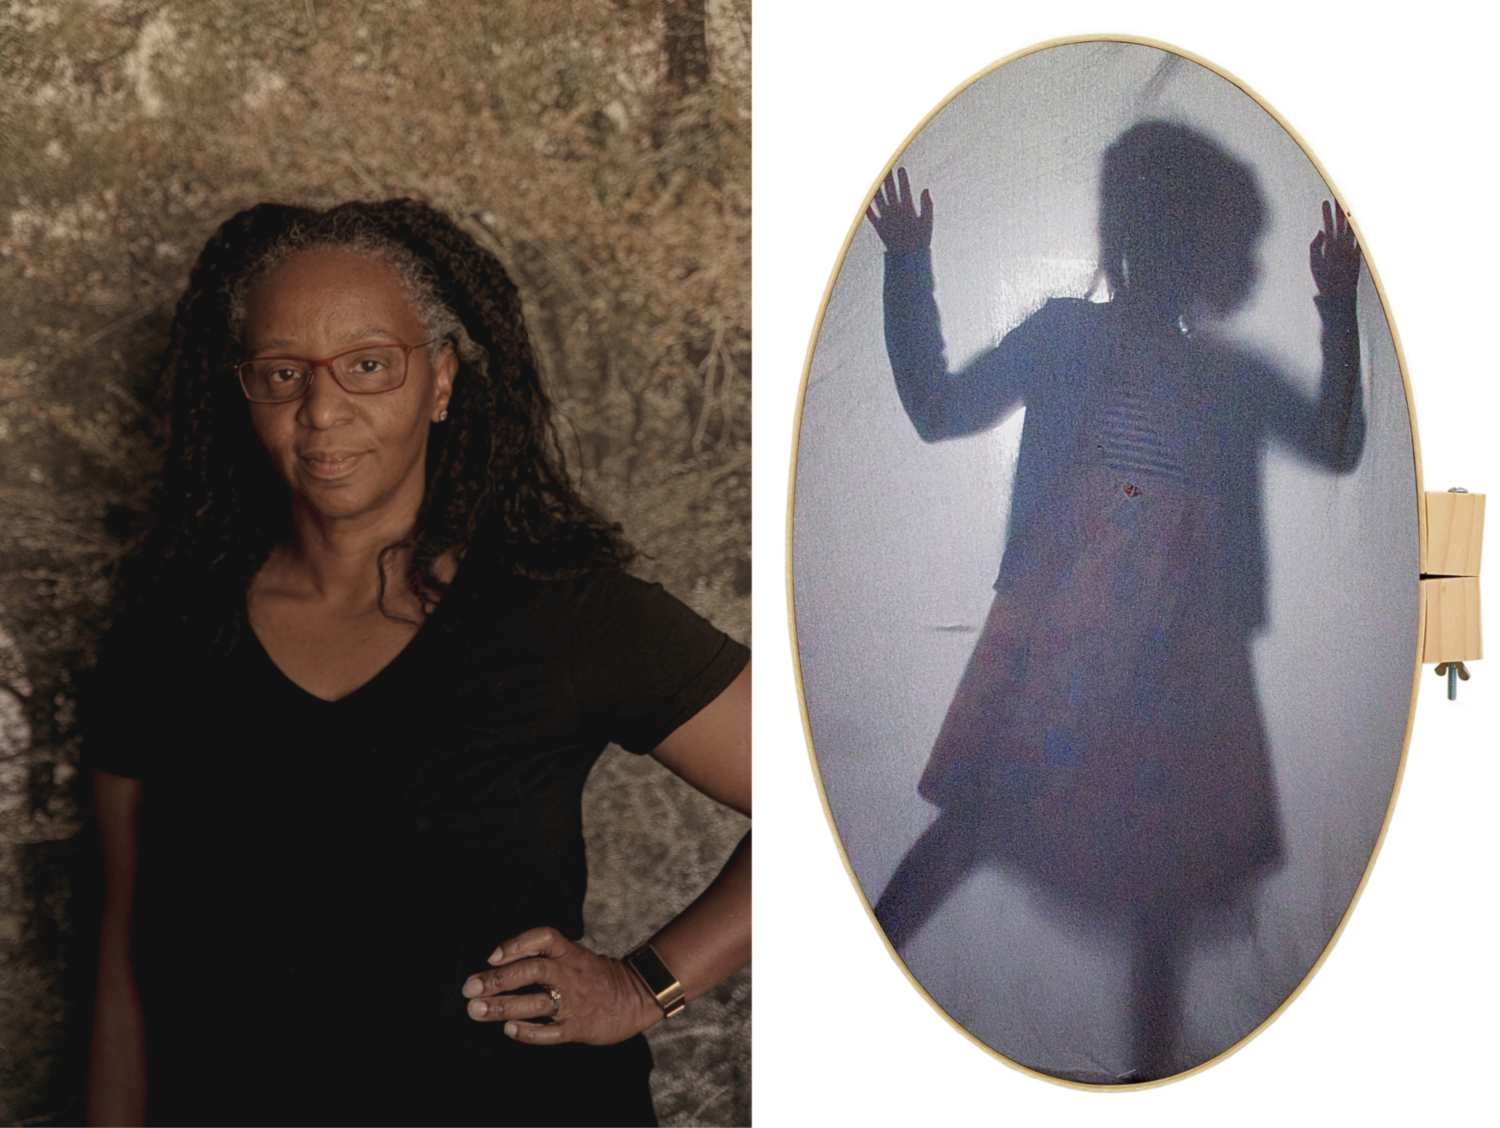 Letitia Huckaby, photographed by Rambo and Sweet Enough, Pigment Print on Cotton Fabric w/ Embroidery Hoop, 12” x 20”, 2020, Courtesy of the artist & Foto Relevance Gallery, Houston, TX